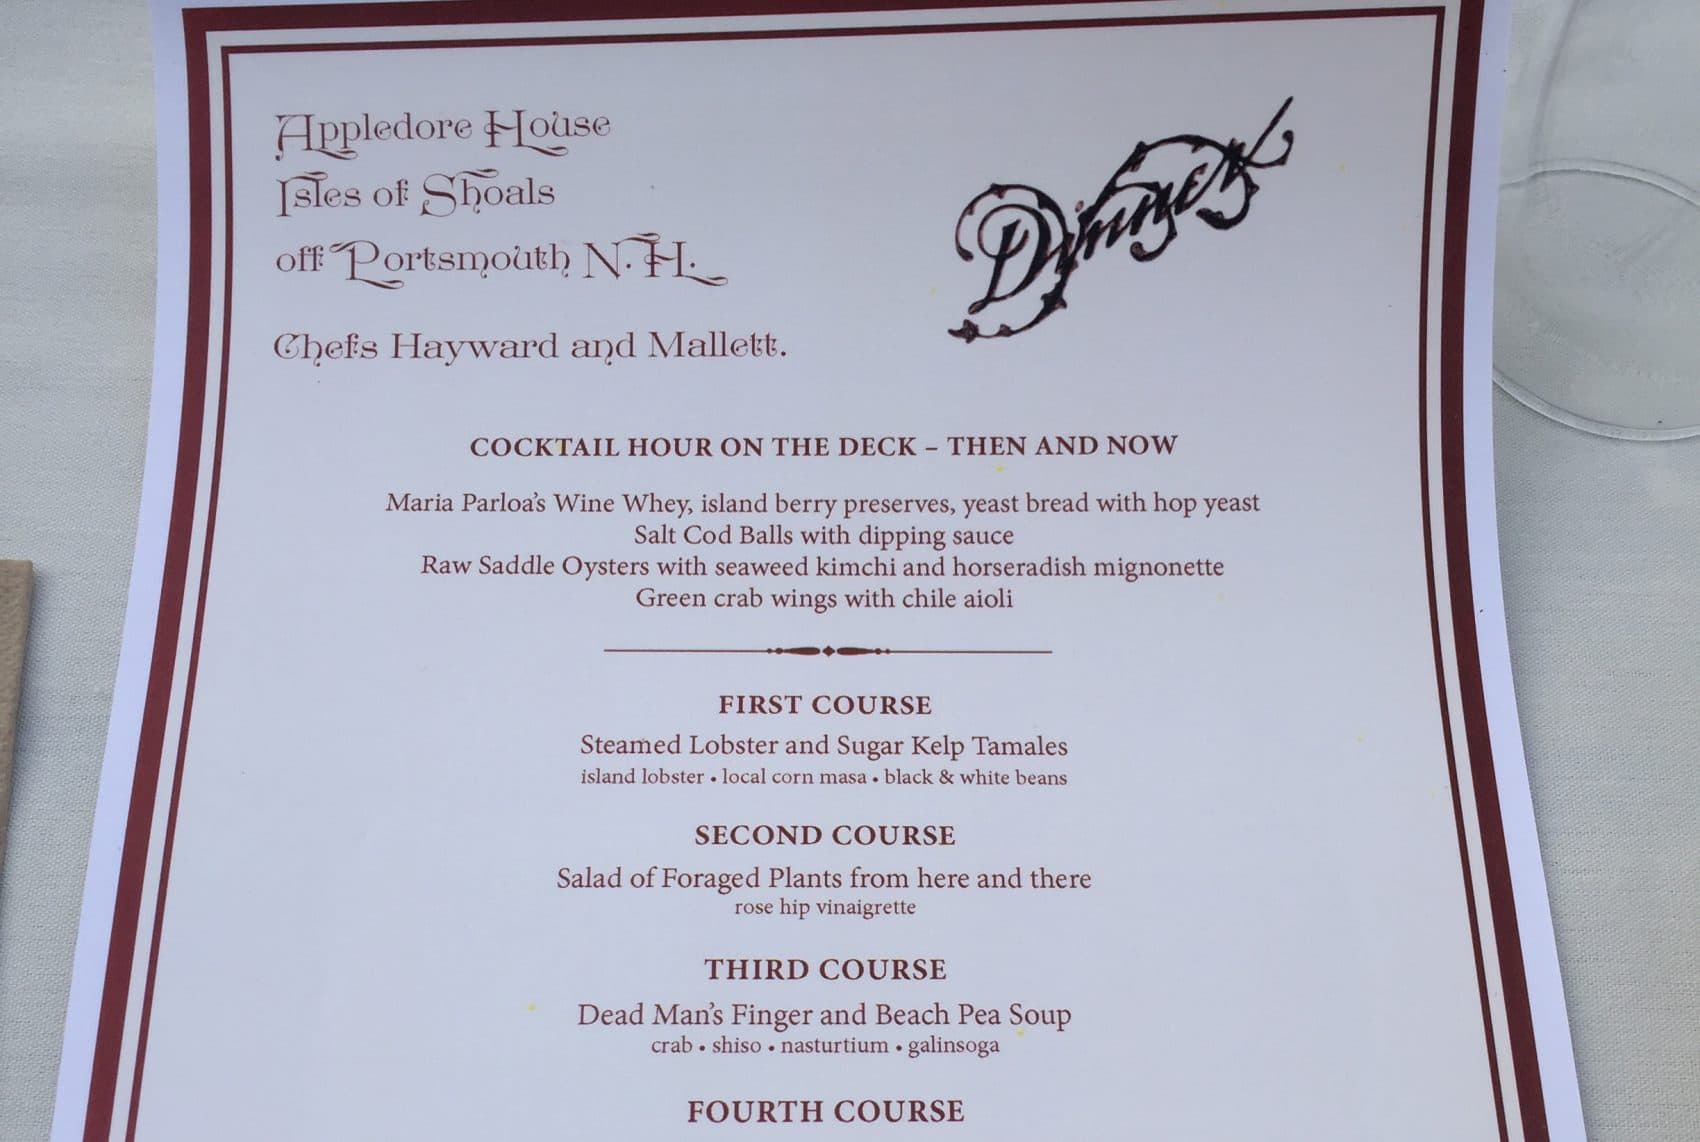 The menu for the Saturday night dinner. (Courtesy Amy Sherwood)